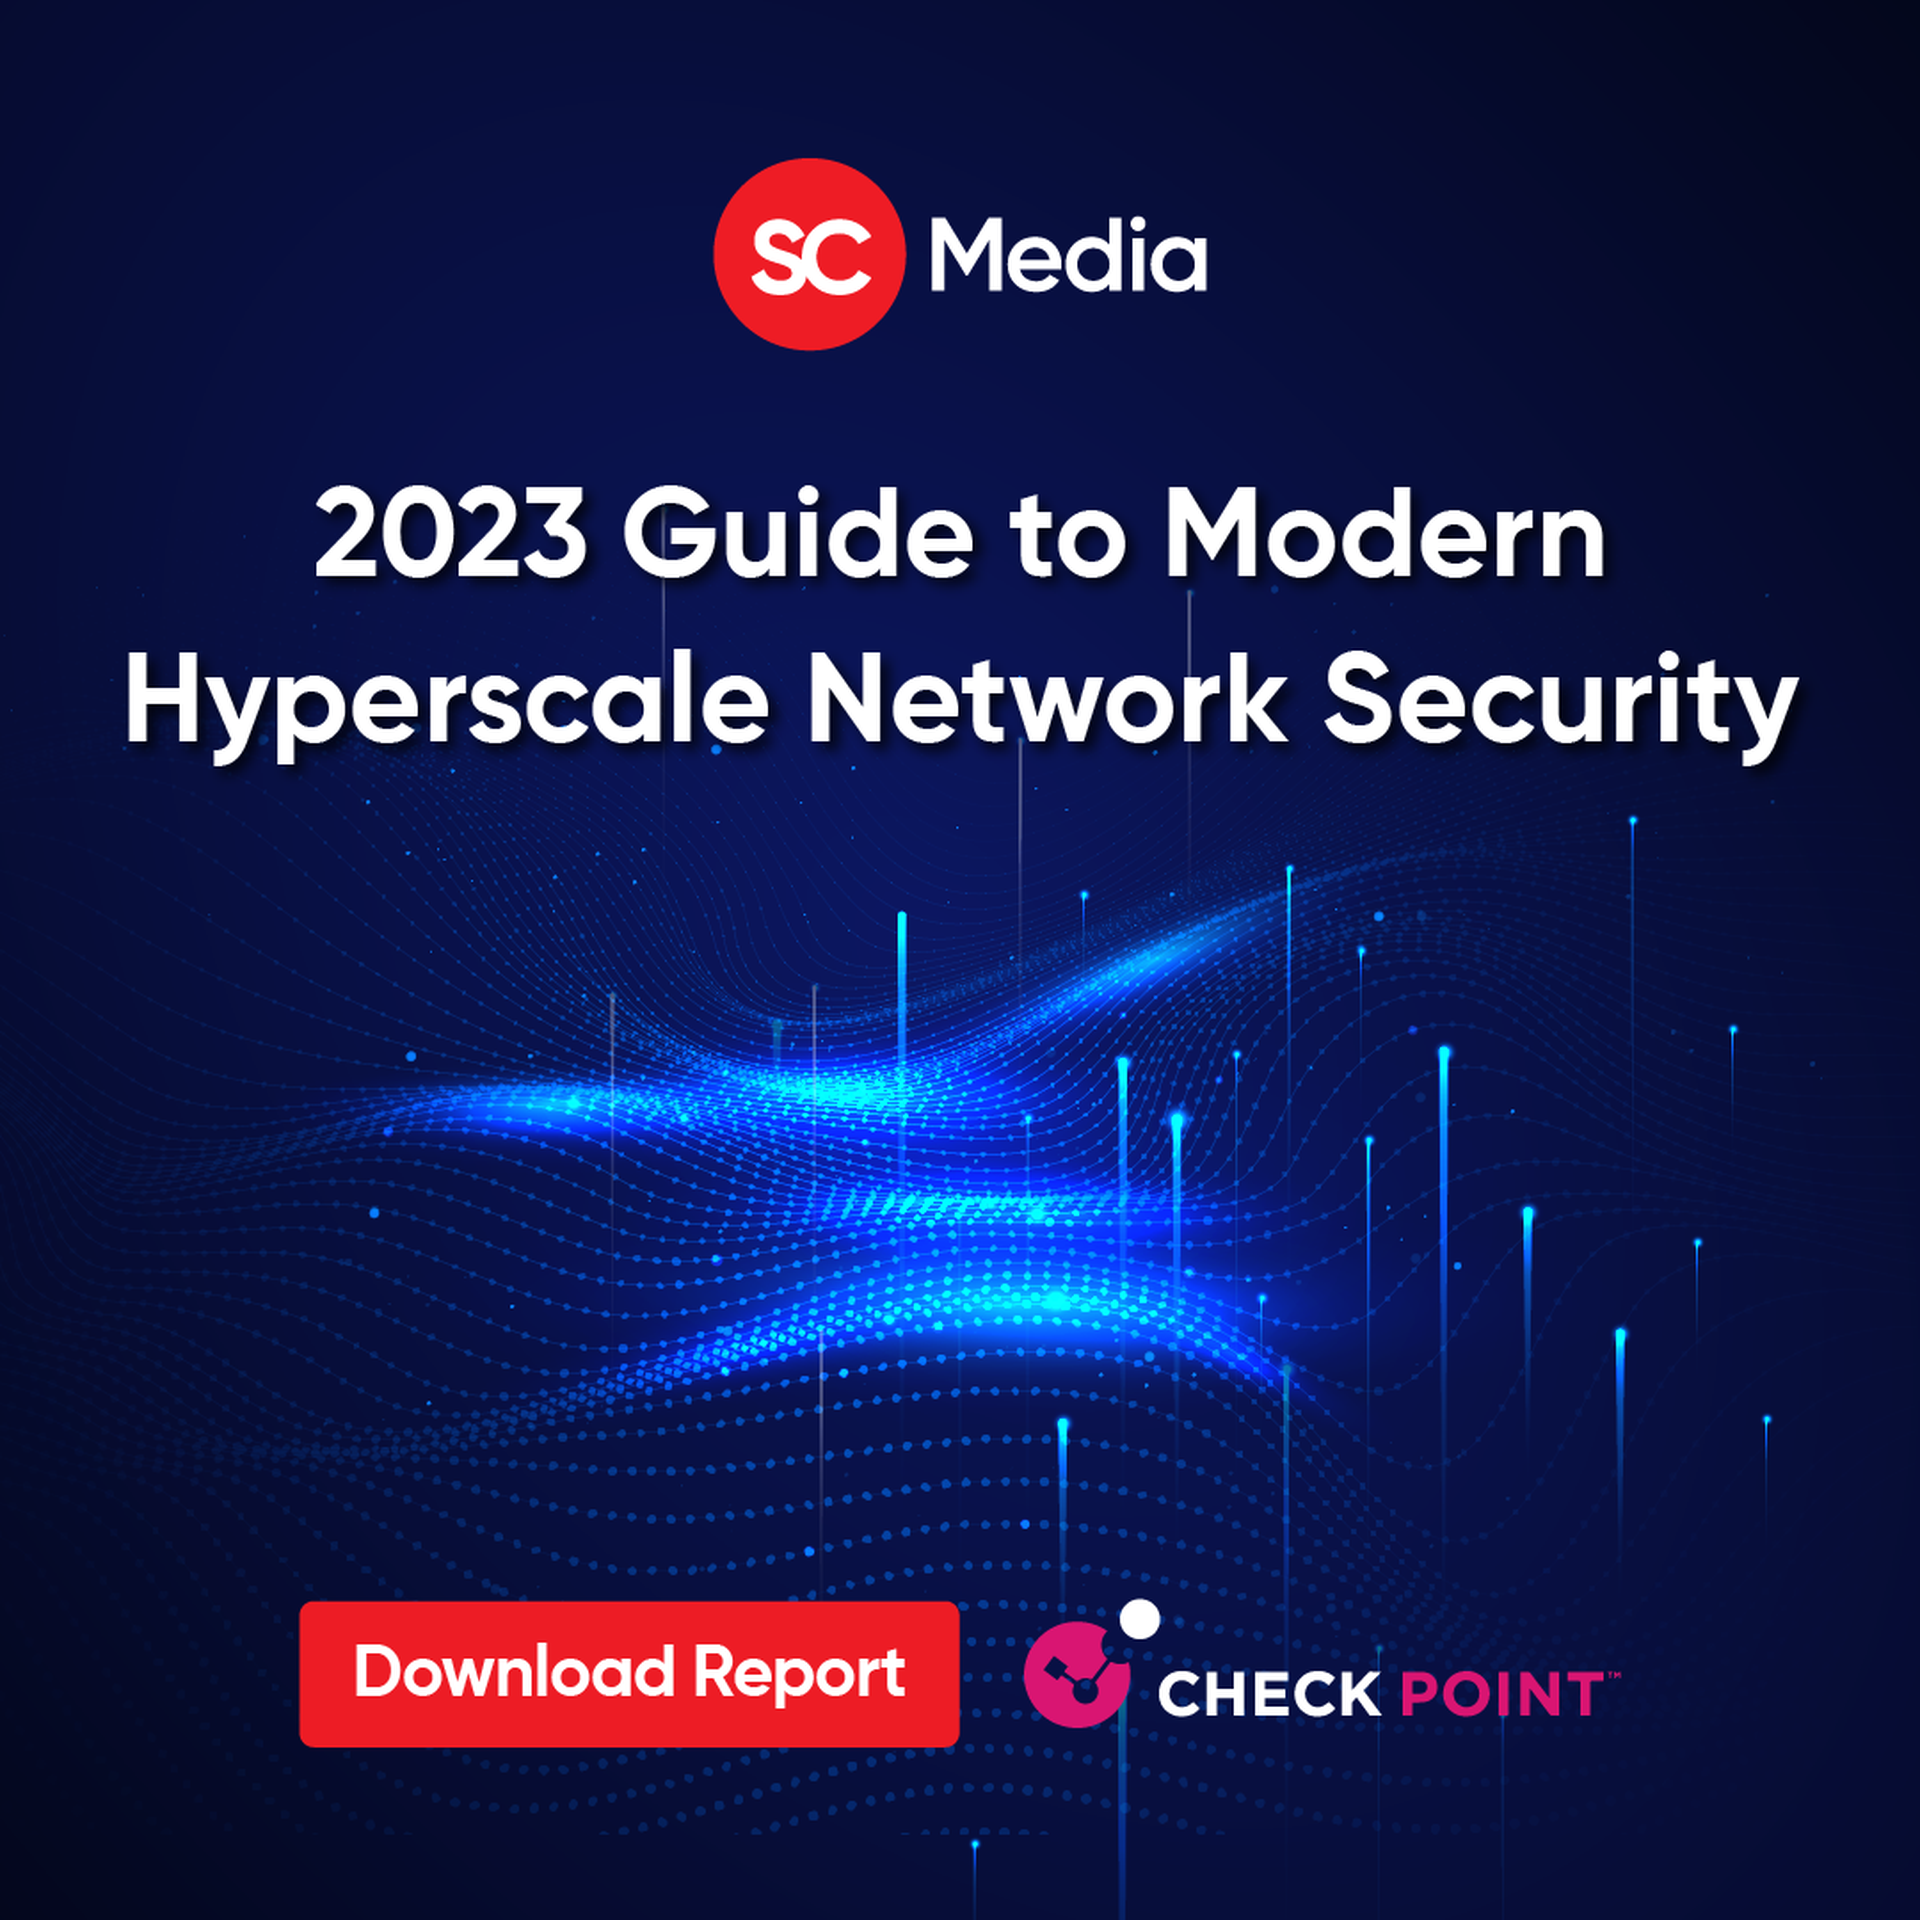 2023 Guide to Modern Hyperscale Network Security